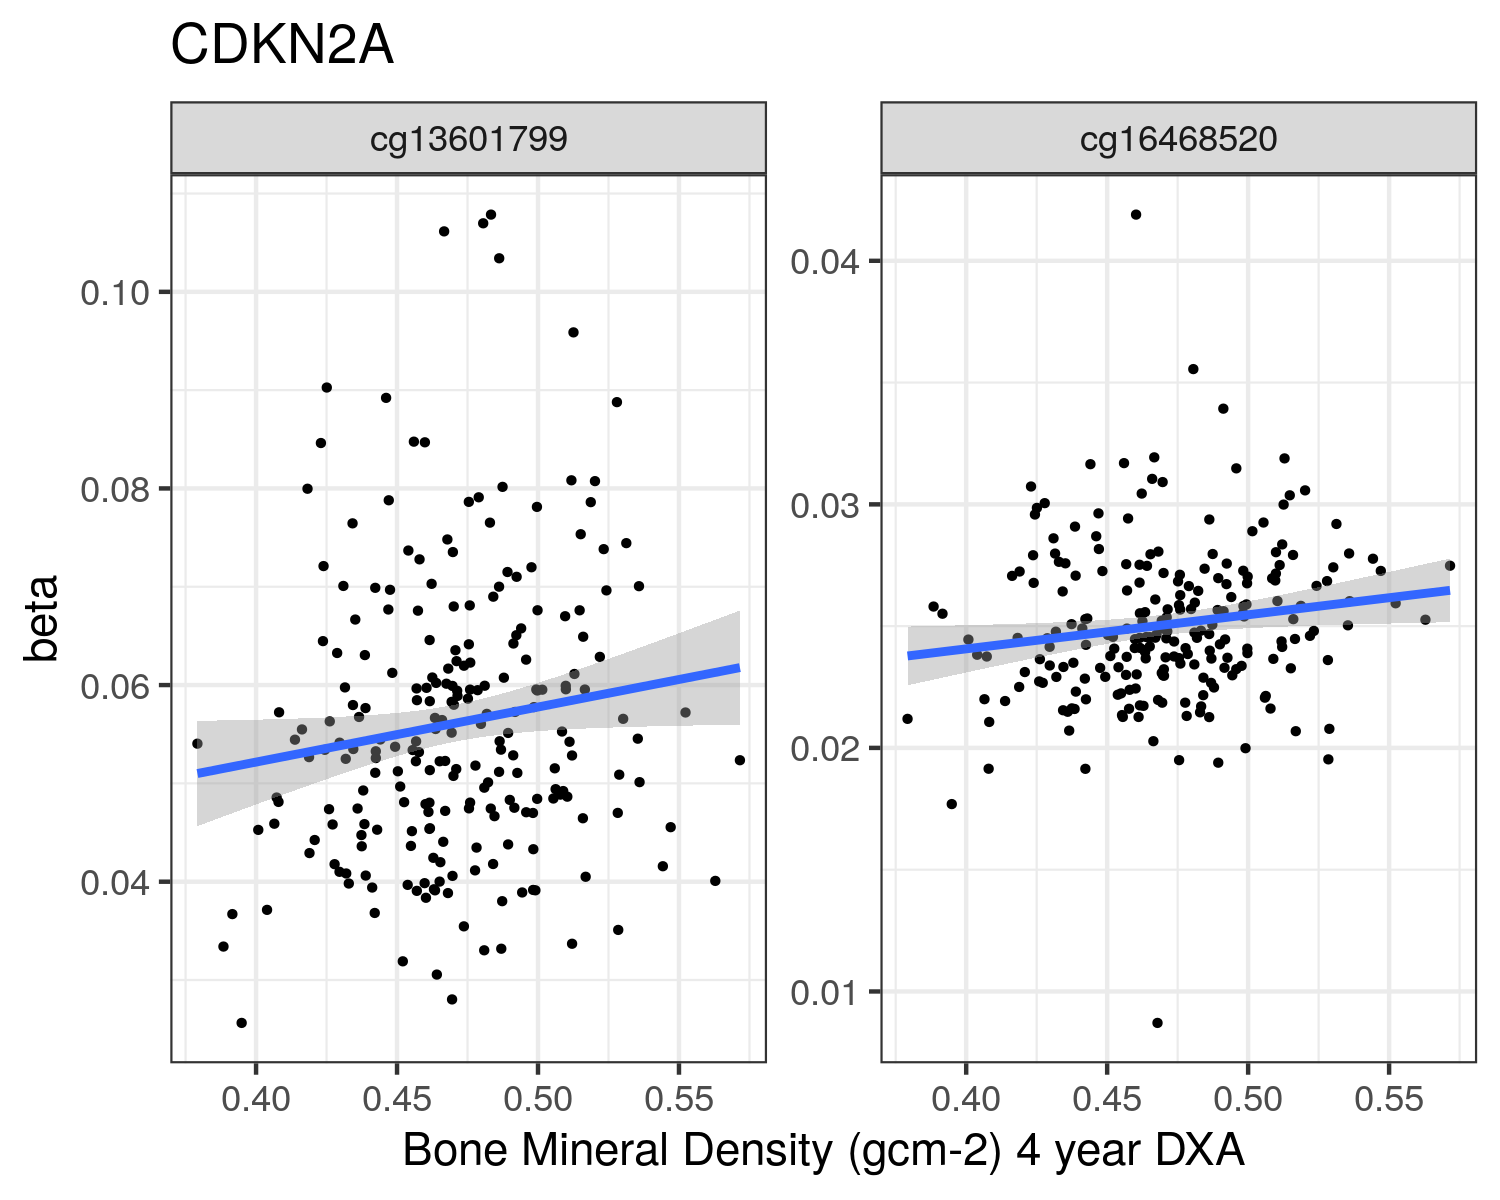 CDKN2A gene associated probes showing nominally significant (p<0.05) changes in DNA methylation with bone mineral density at 4 years